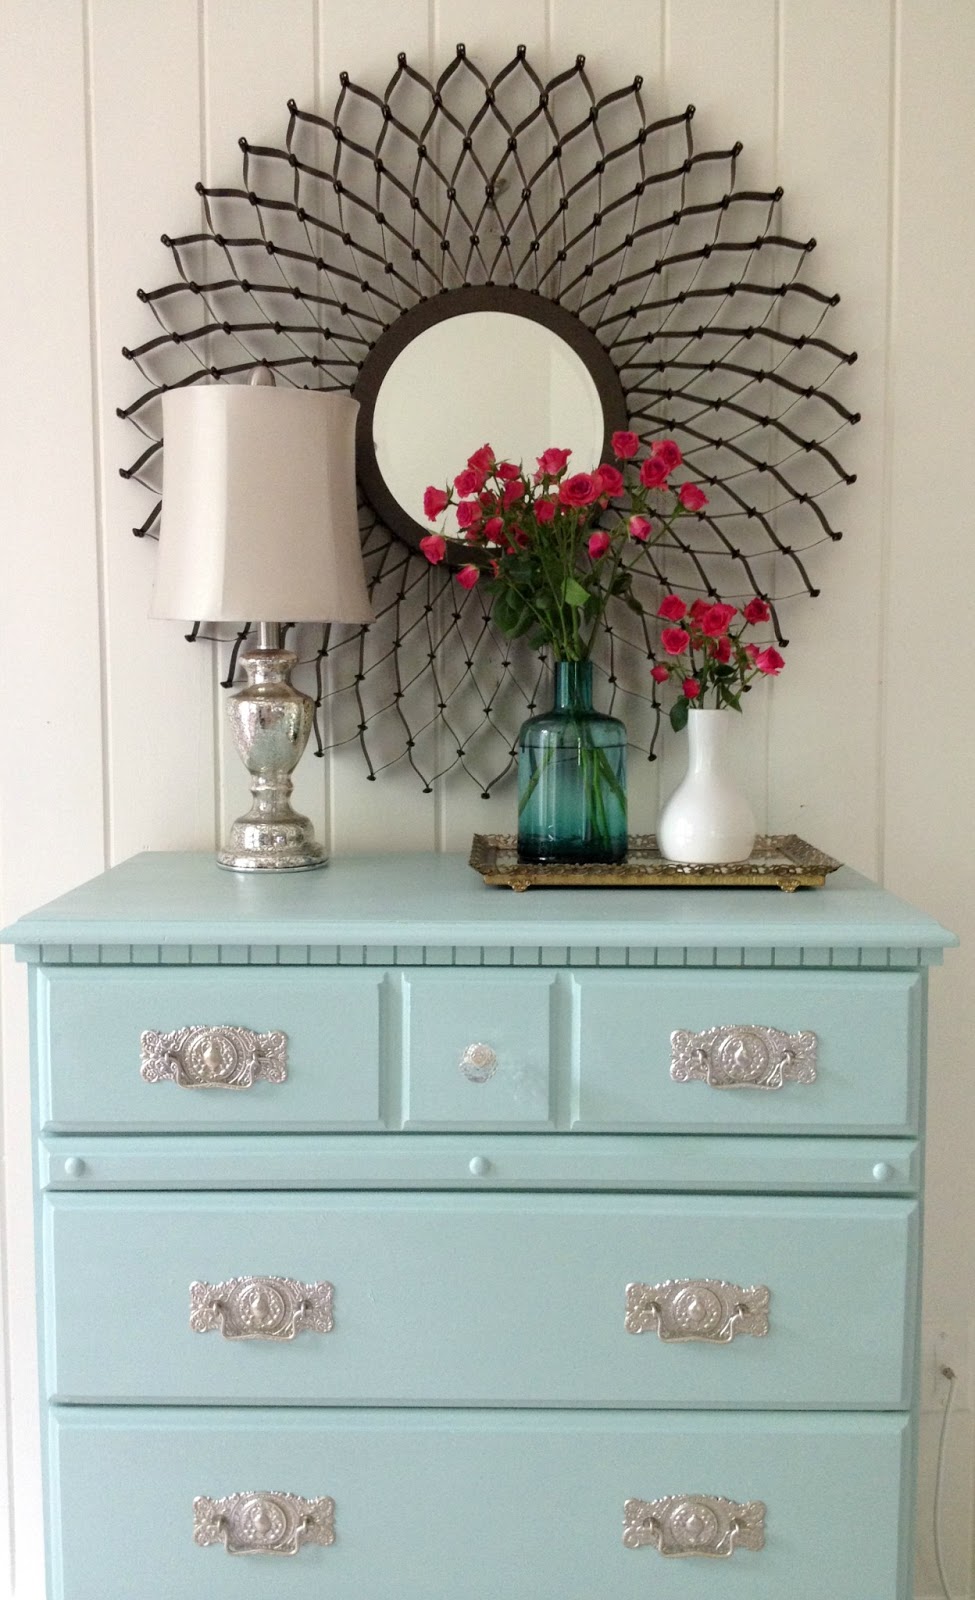 Livelovediy How To Paint Laminate Furniture In 3 Easy Steps